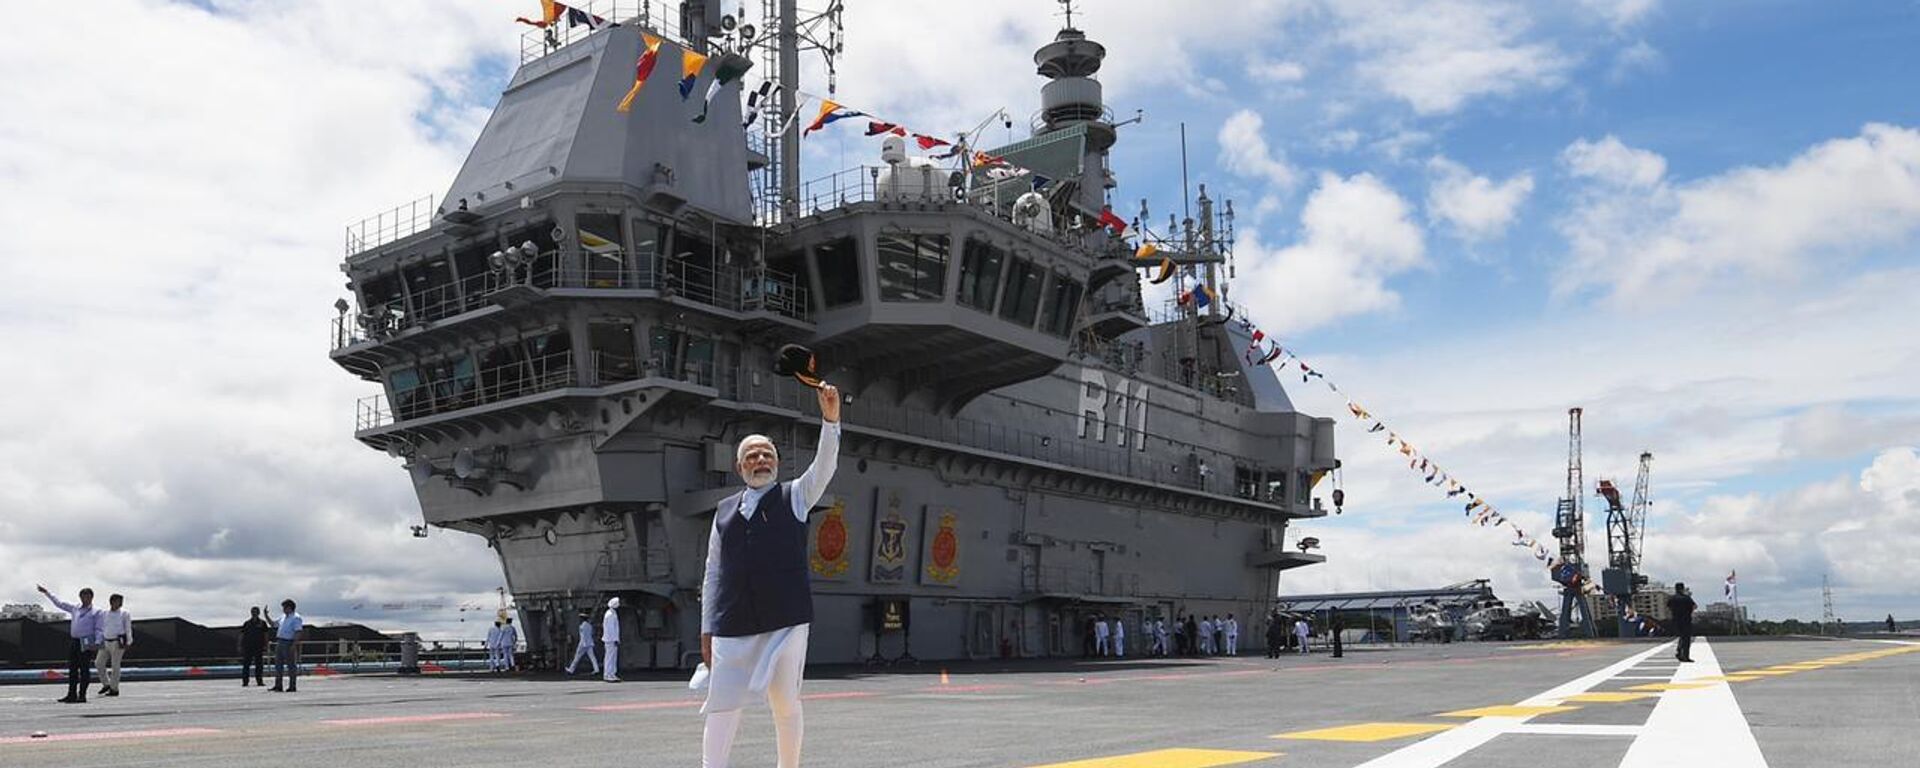 Glimpses from the special programme to mark the commissioning of INS Vikrant - Sputnik India, 1920, 08.03.2023